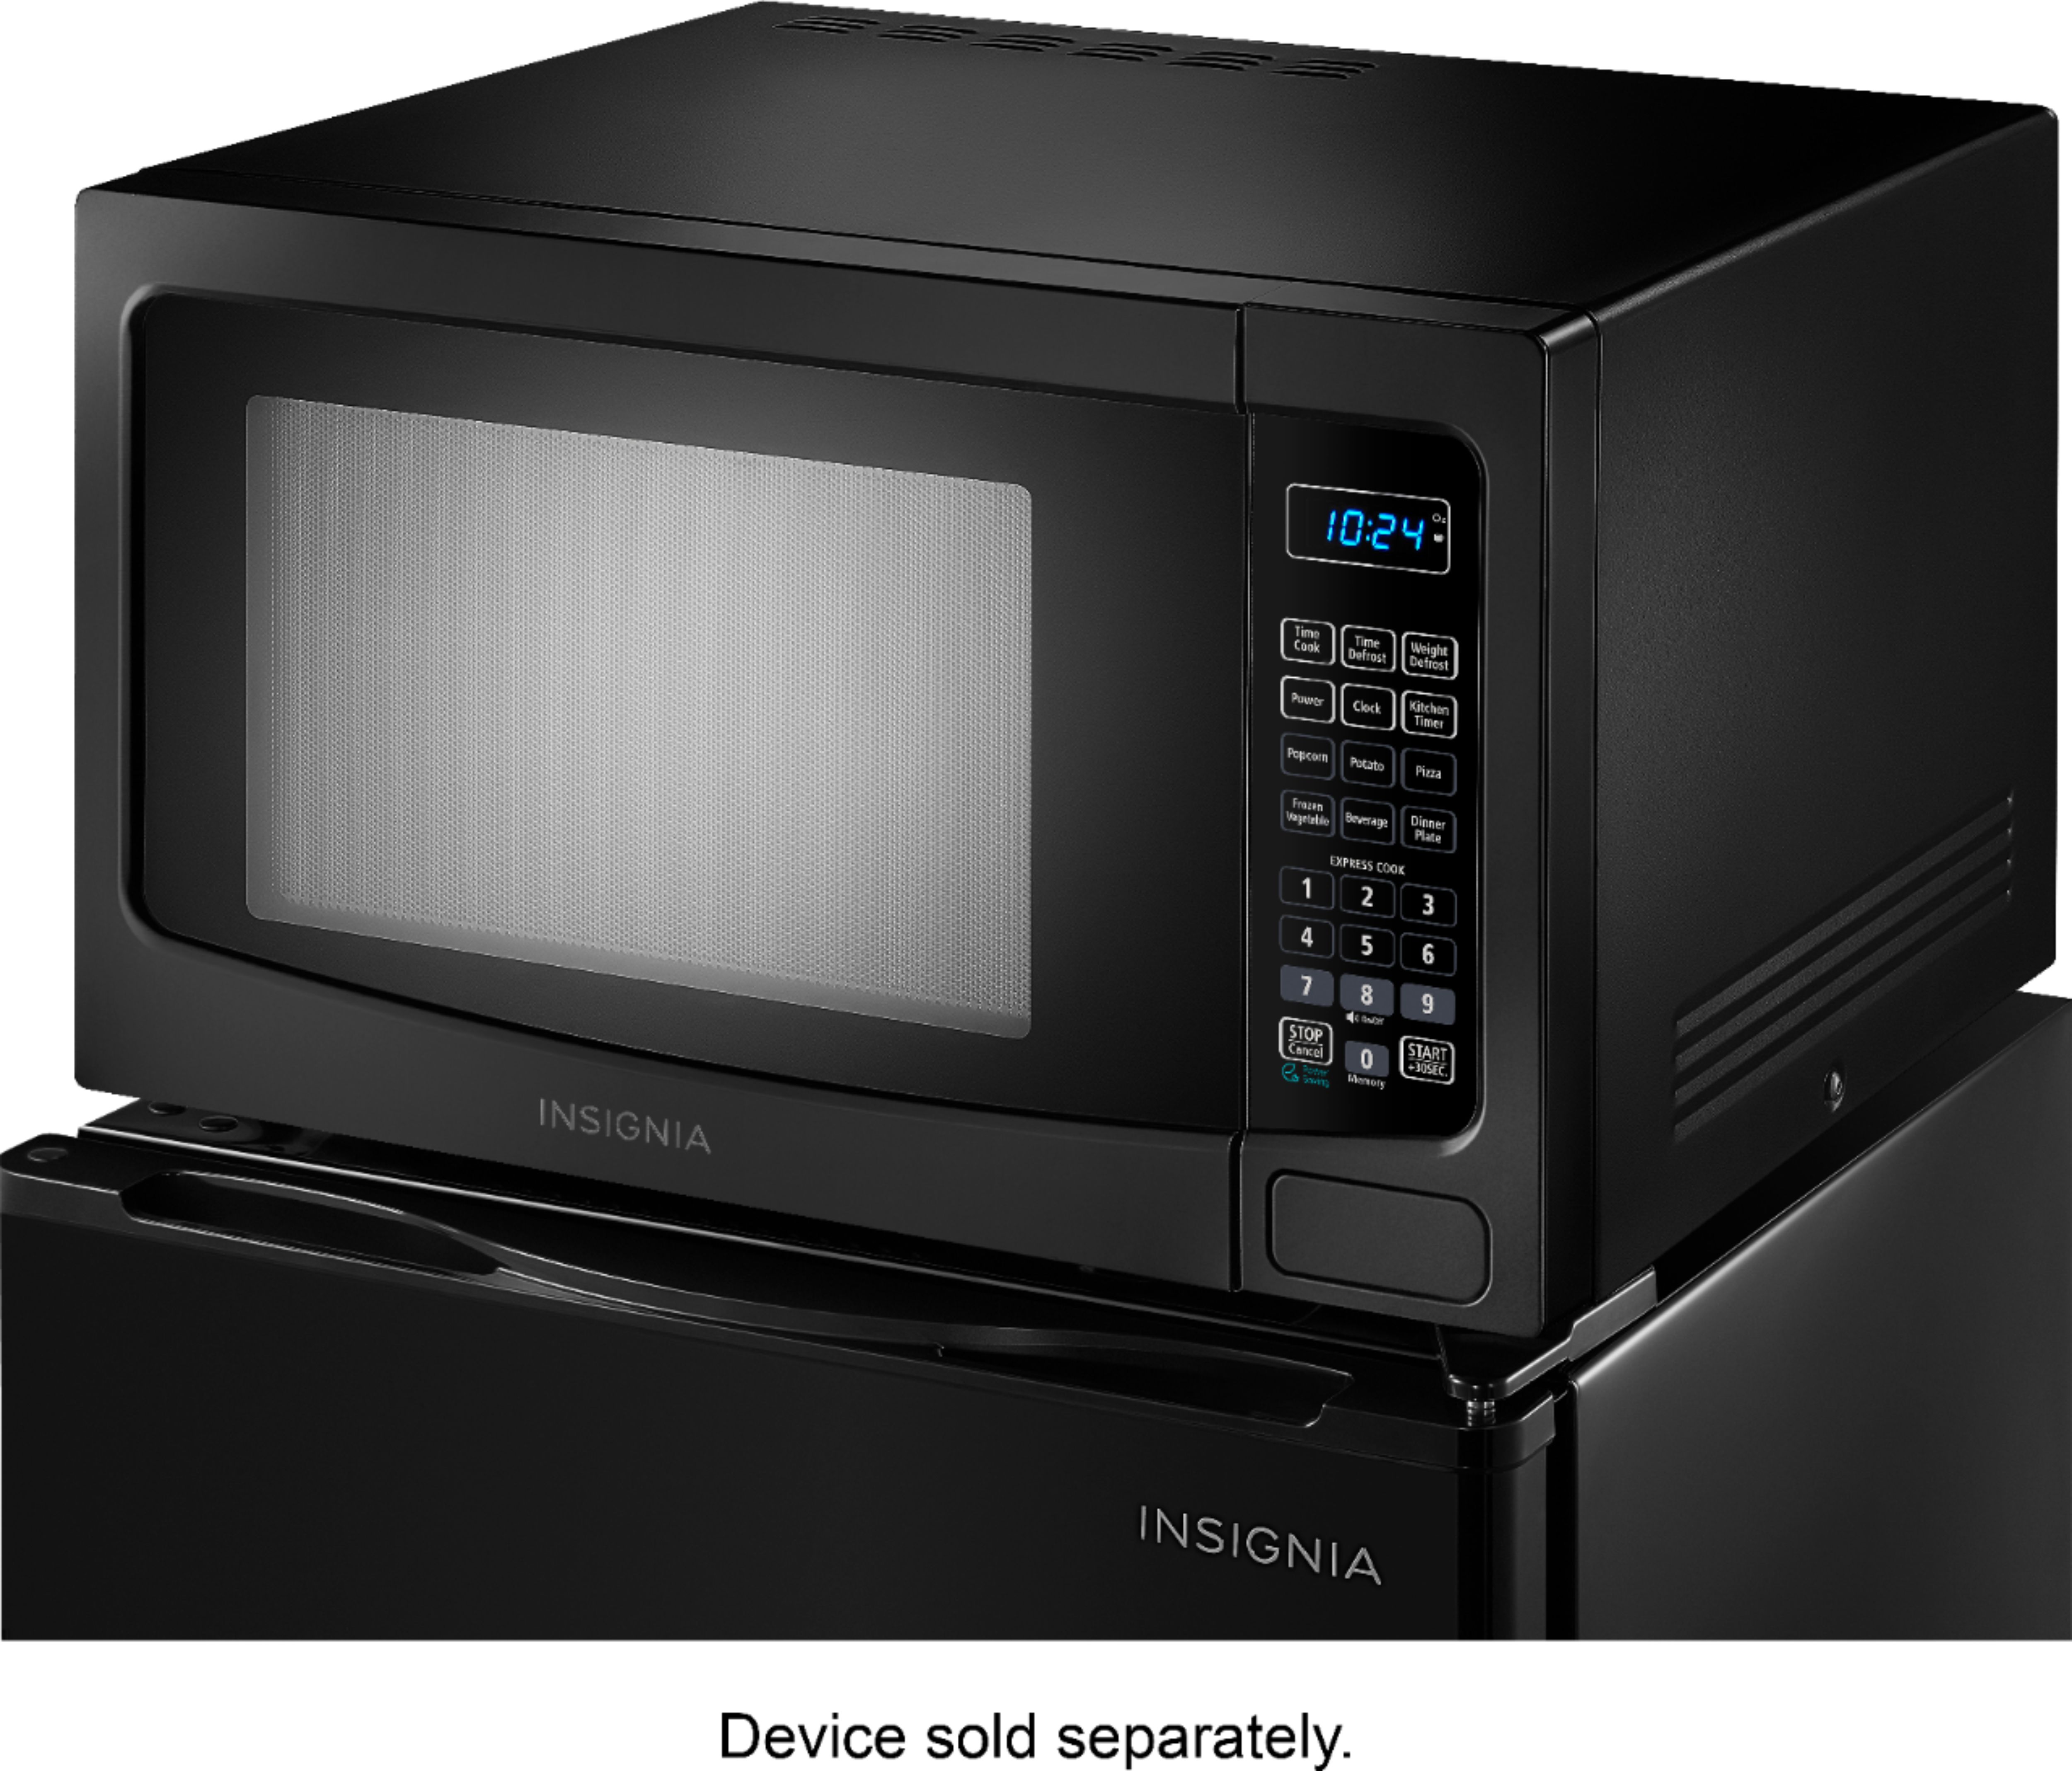 Insignia™ - 0.9 Cu. Ft. Compact Microwave Oven, One-Touch Cooking